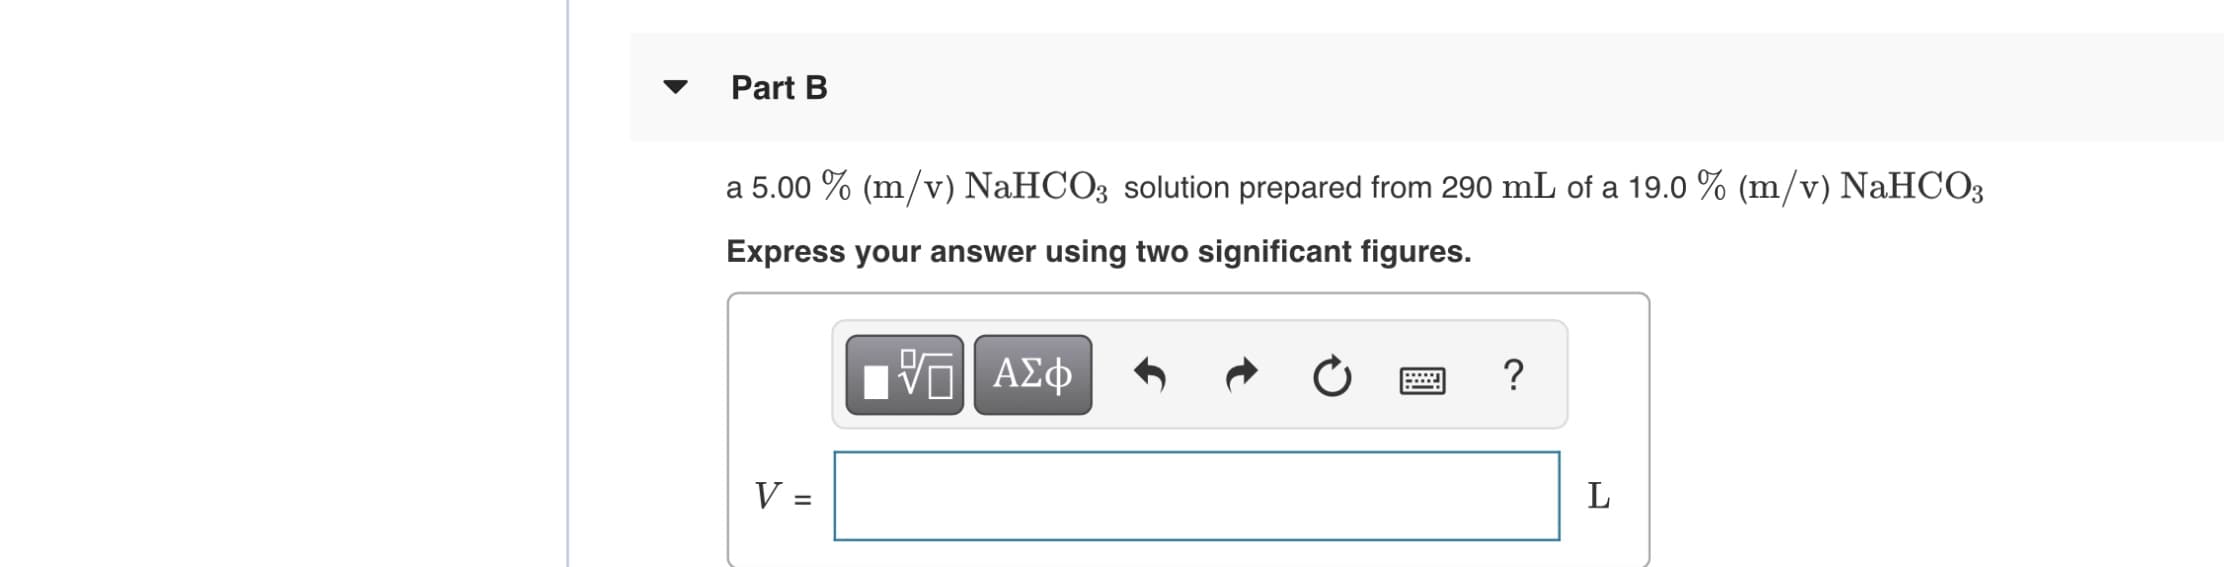 Part B
a 5.00 % (m/v) NaHCO3 solution prepared from 290 mL of a 19.o % (m/v) NaHCO3
Express your answer using two significant figures.
ΑΣφ
V =
L
